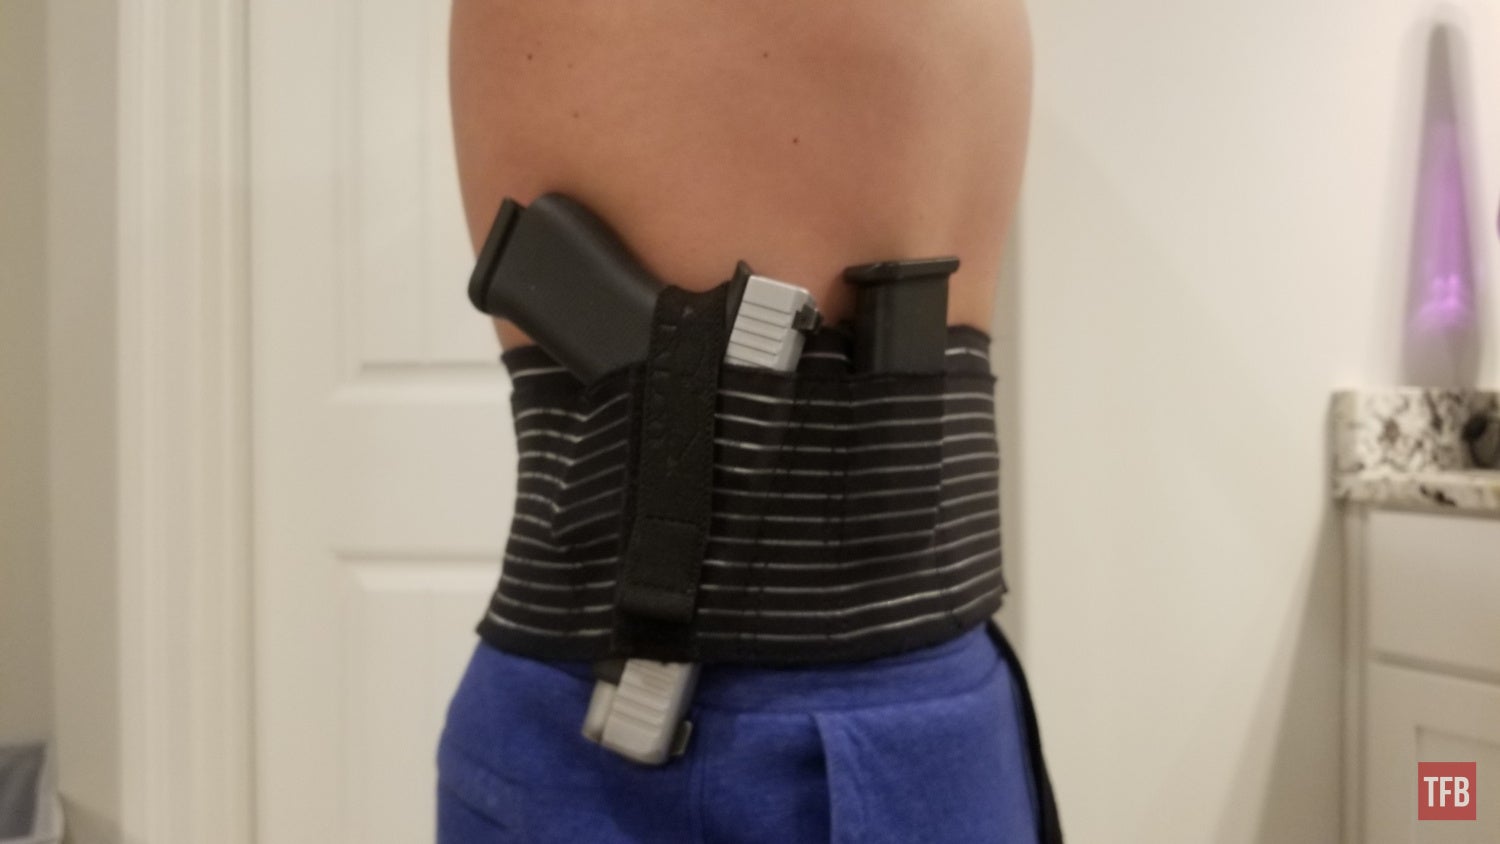 Belly Band Bonanza: The TFB Belly Band Holster Review Roundup